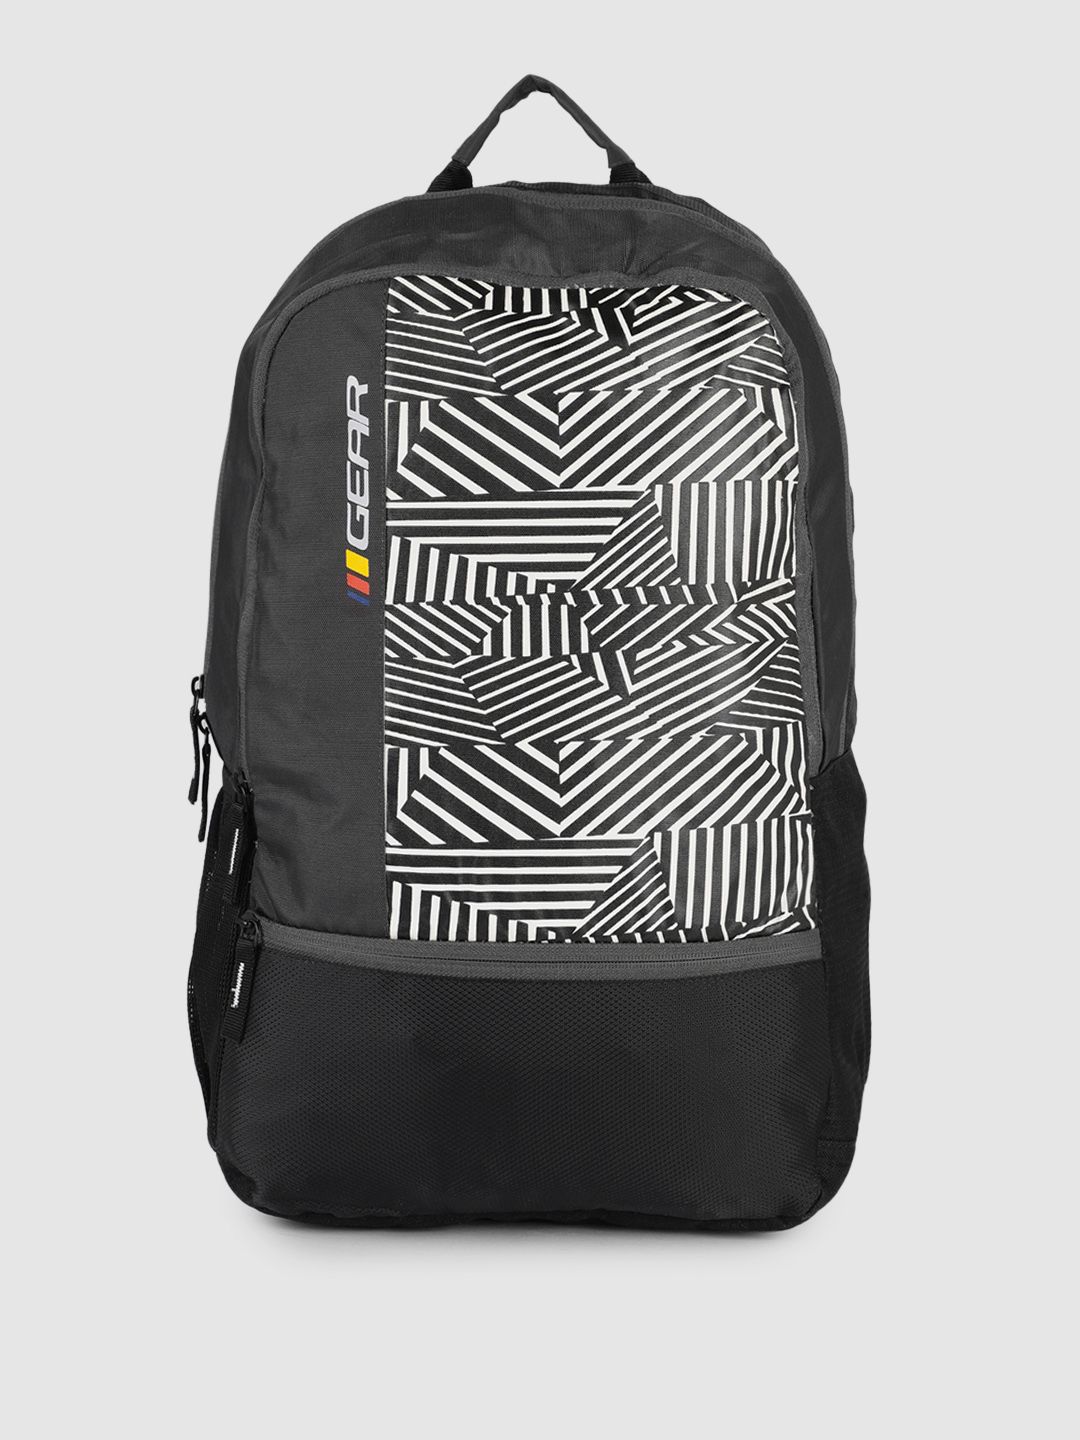 Gear Unisex Black & White Maze Geometric Printed Backpack Price in India